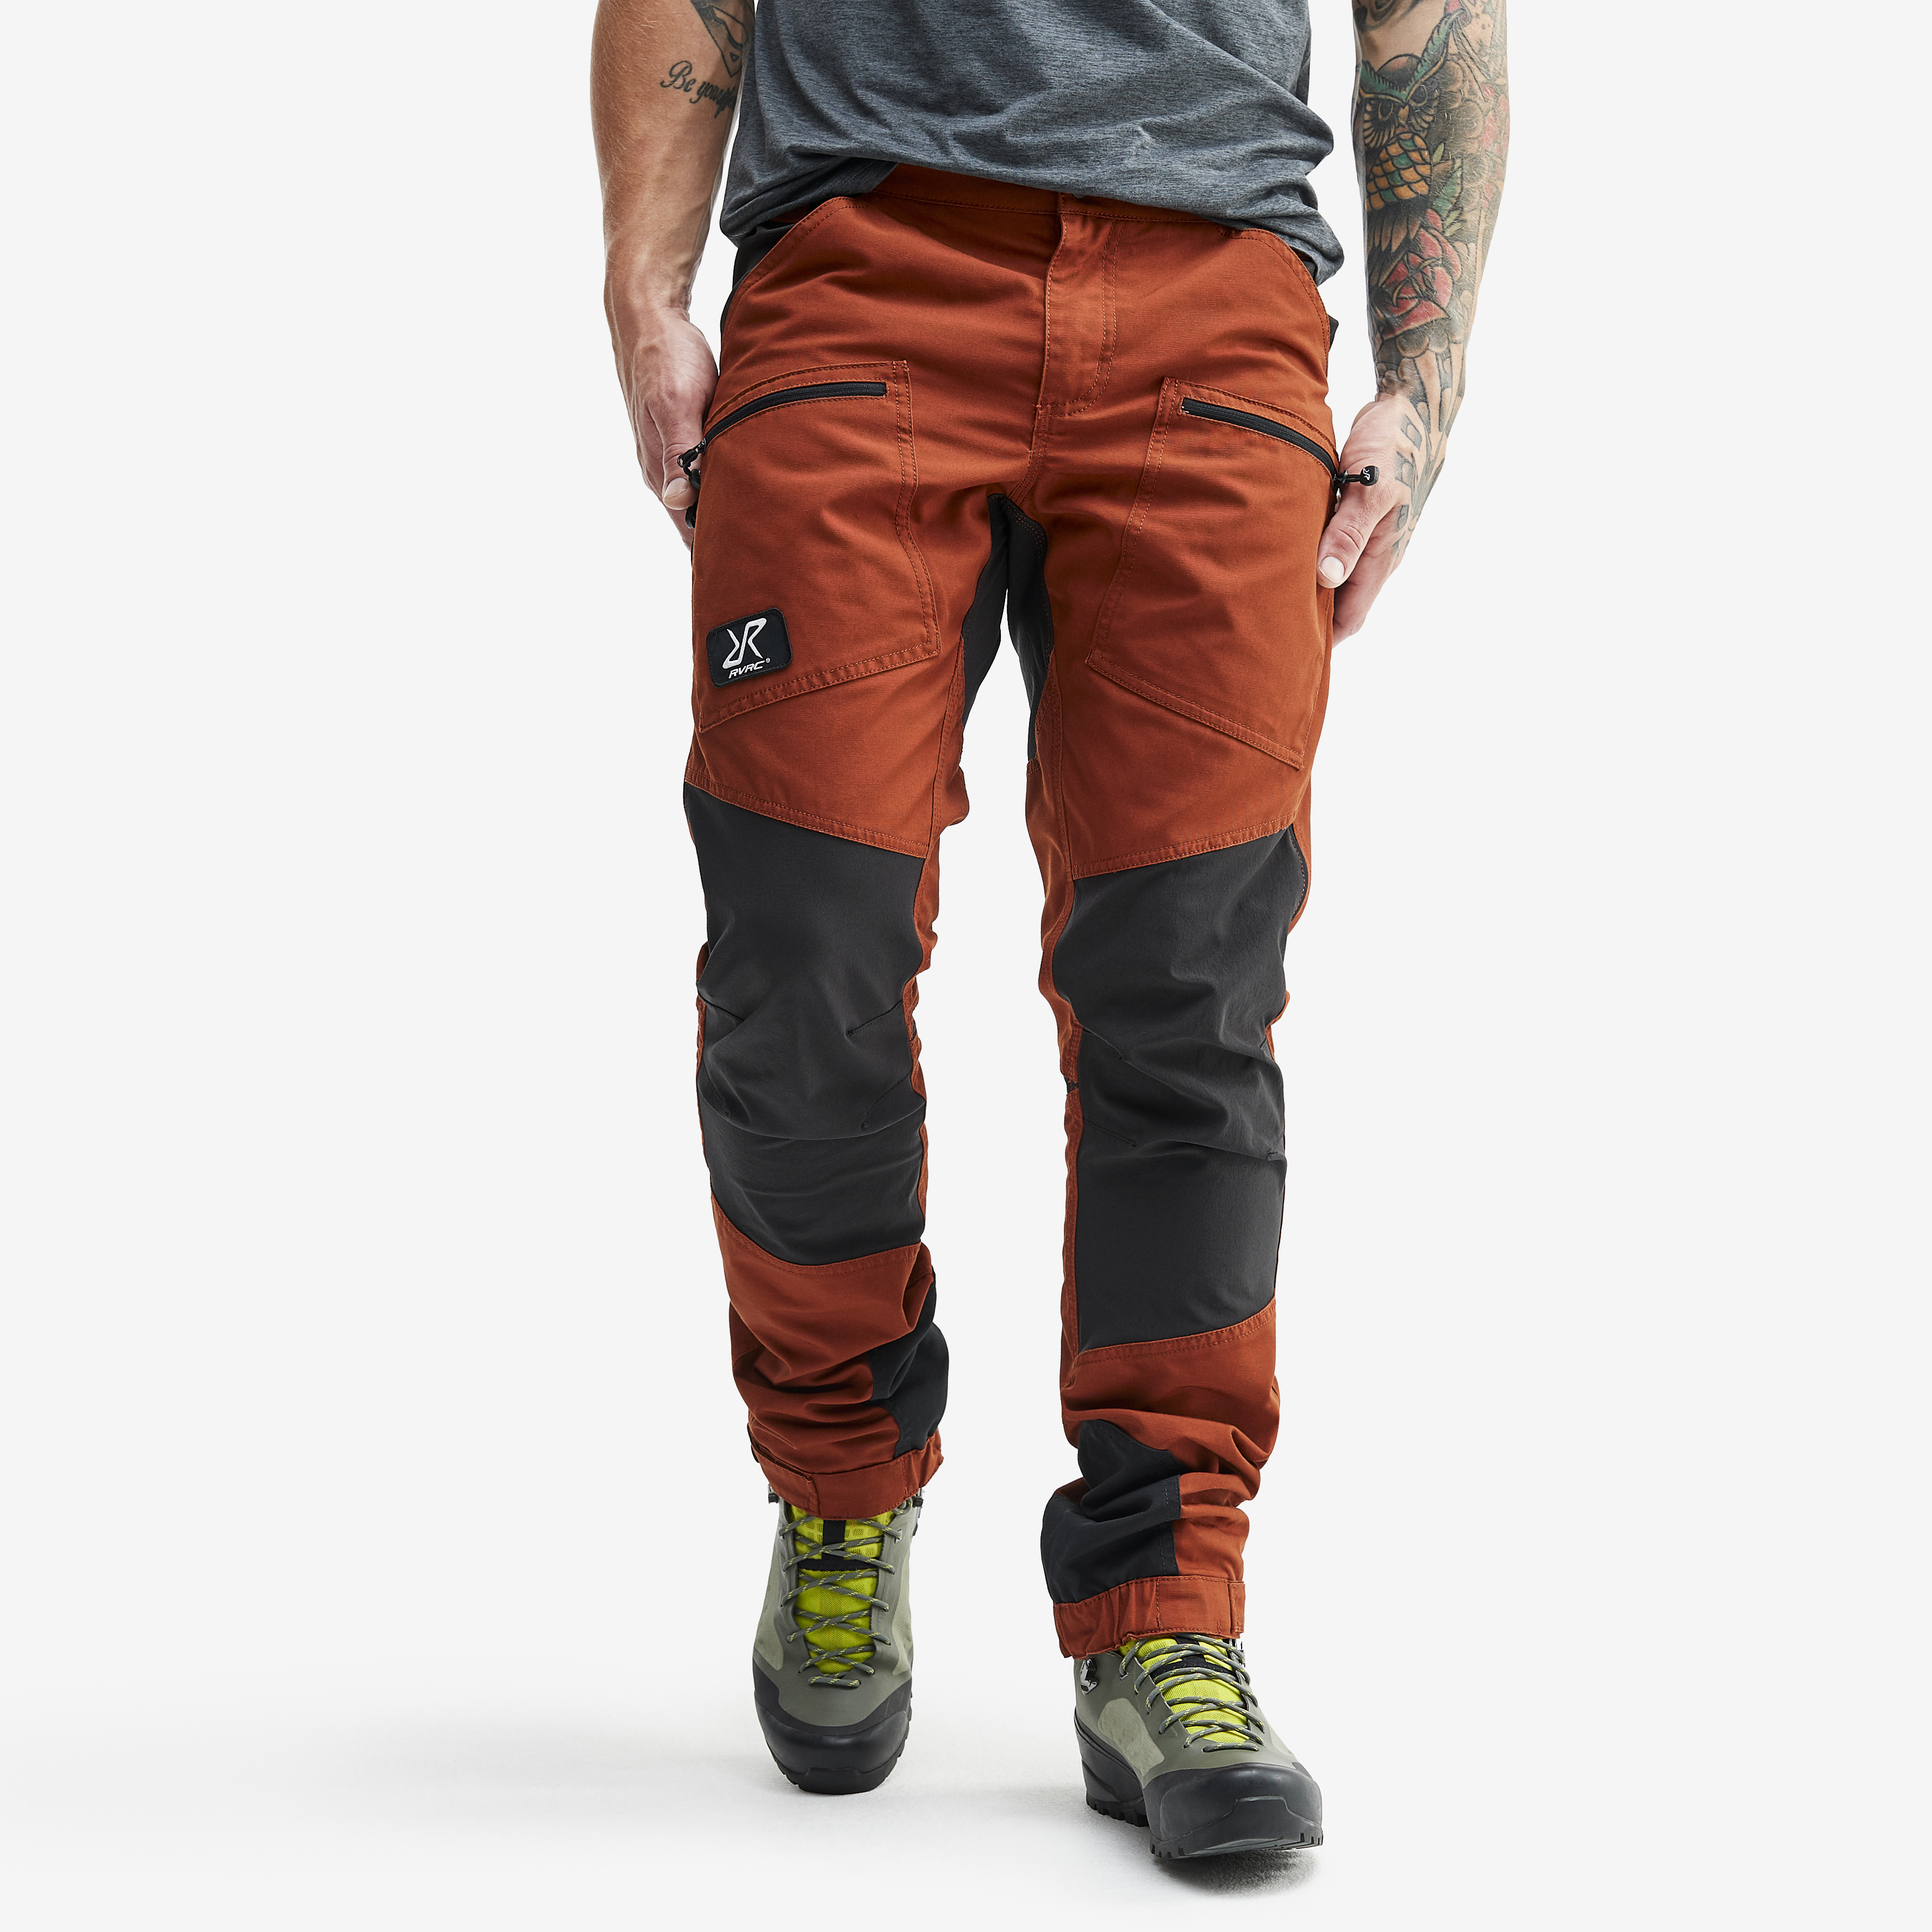 Nordwand Pro Pants Rusty Orange Hombres